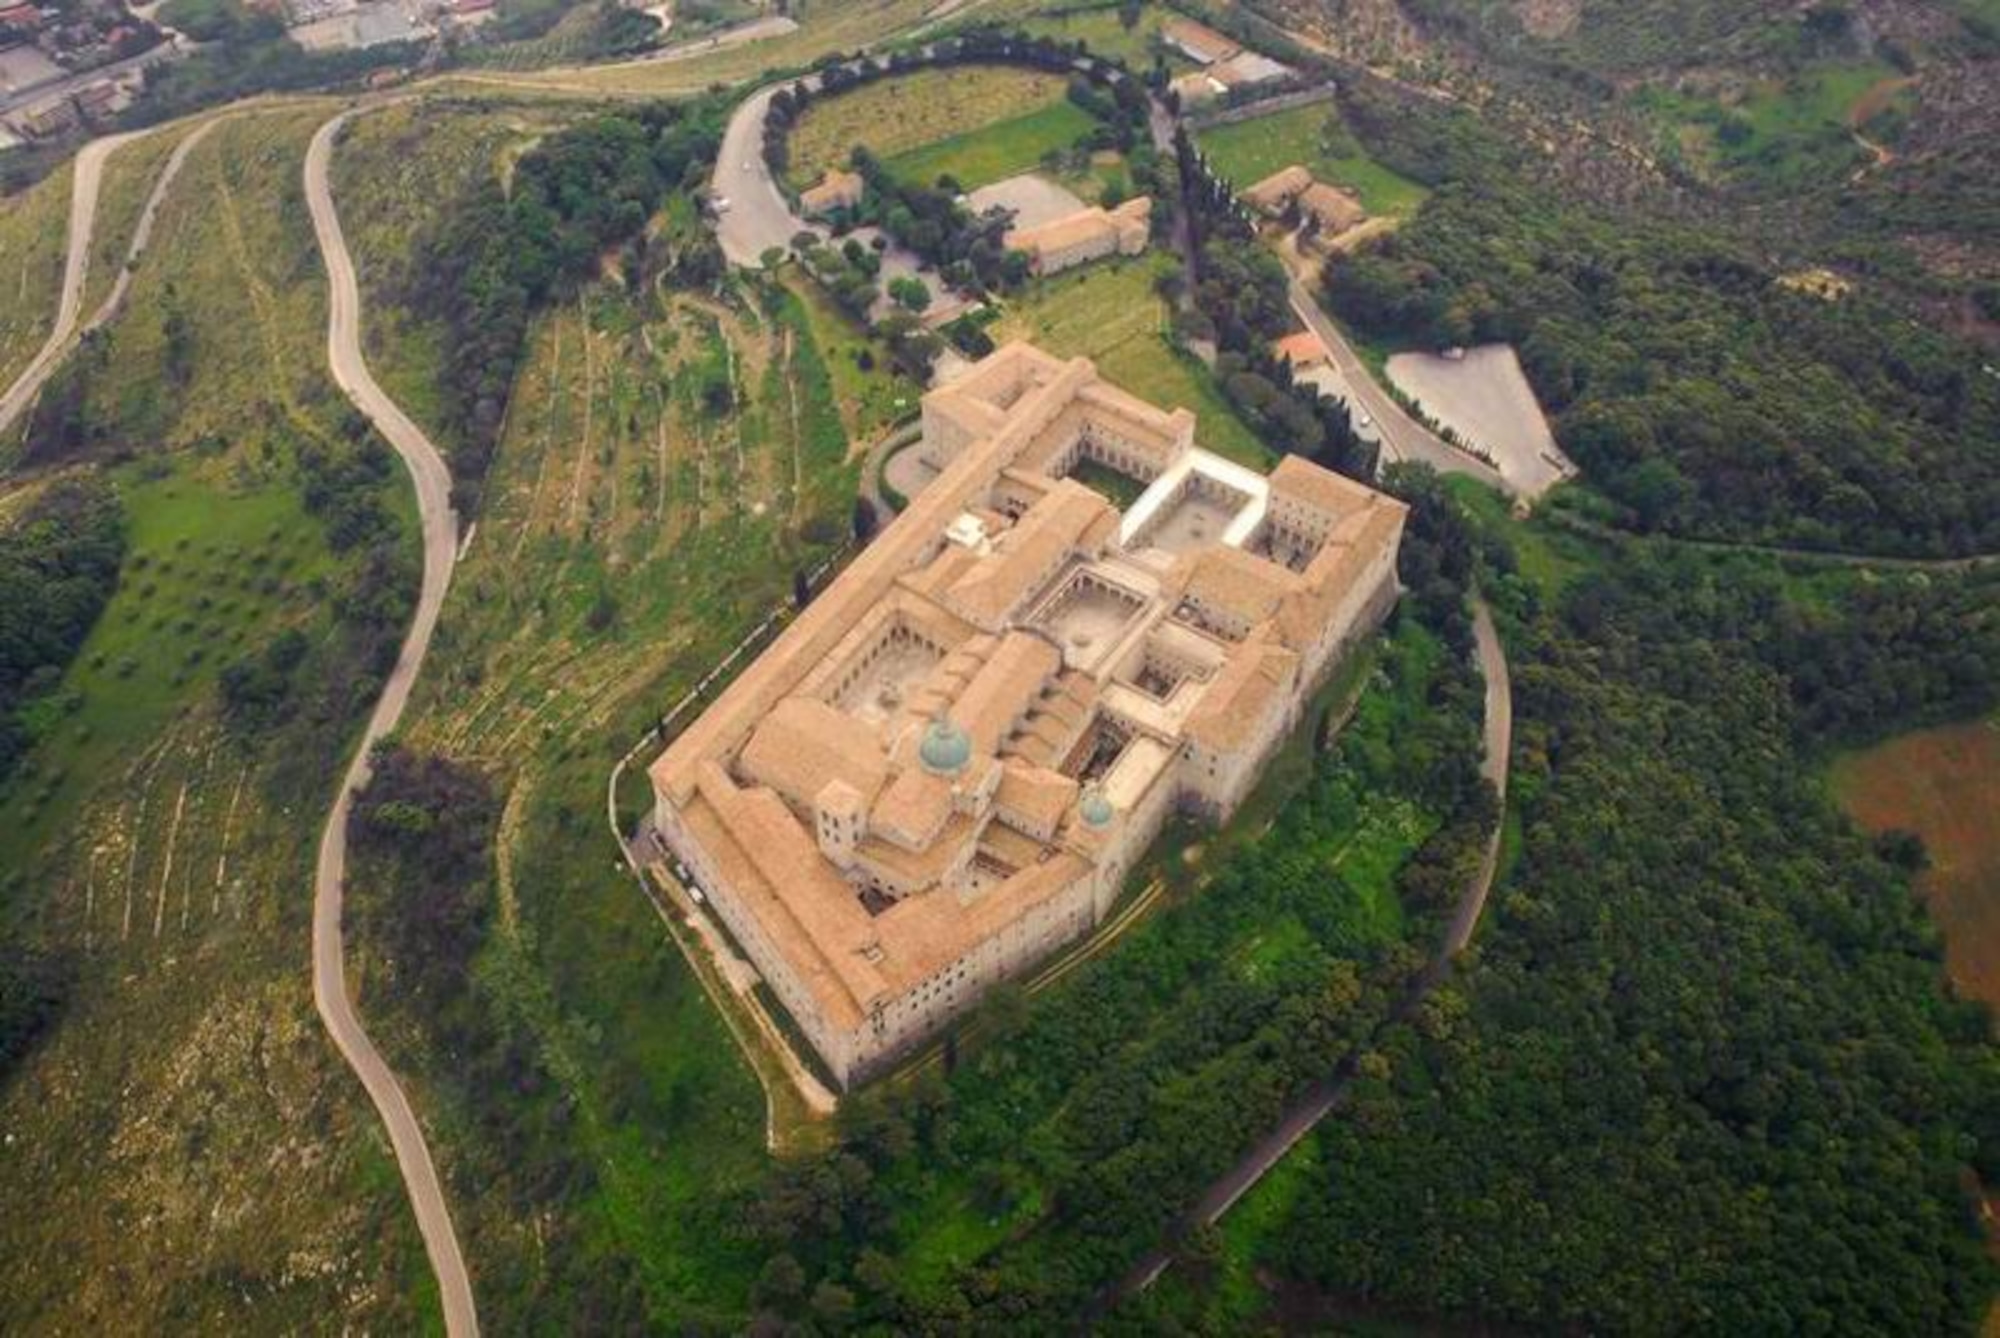 The new and rebuilt Monte Cassino on its original site.  This initiative was funded by the Italian government shortly after the end of World War II. (Courtesy photo)